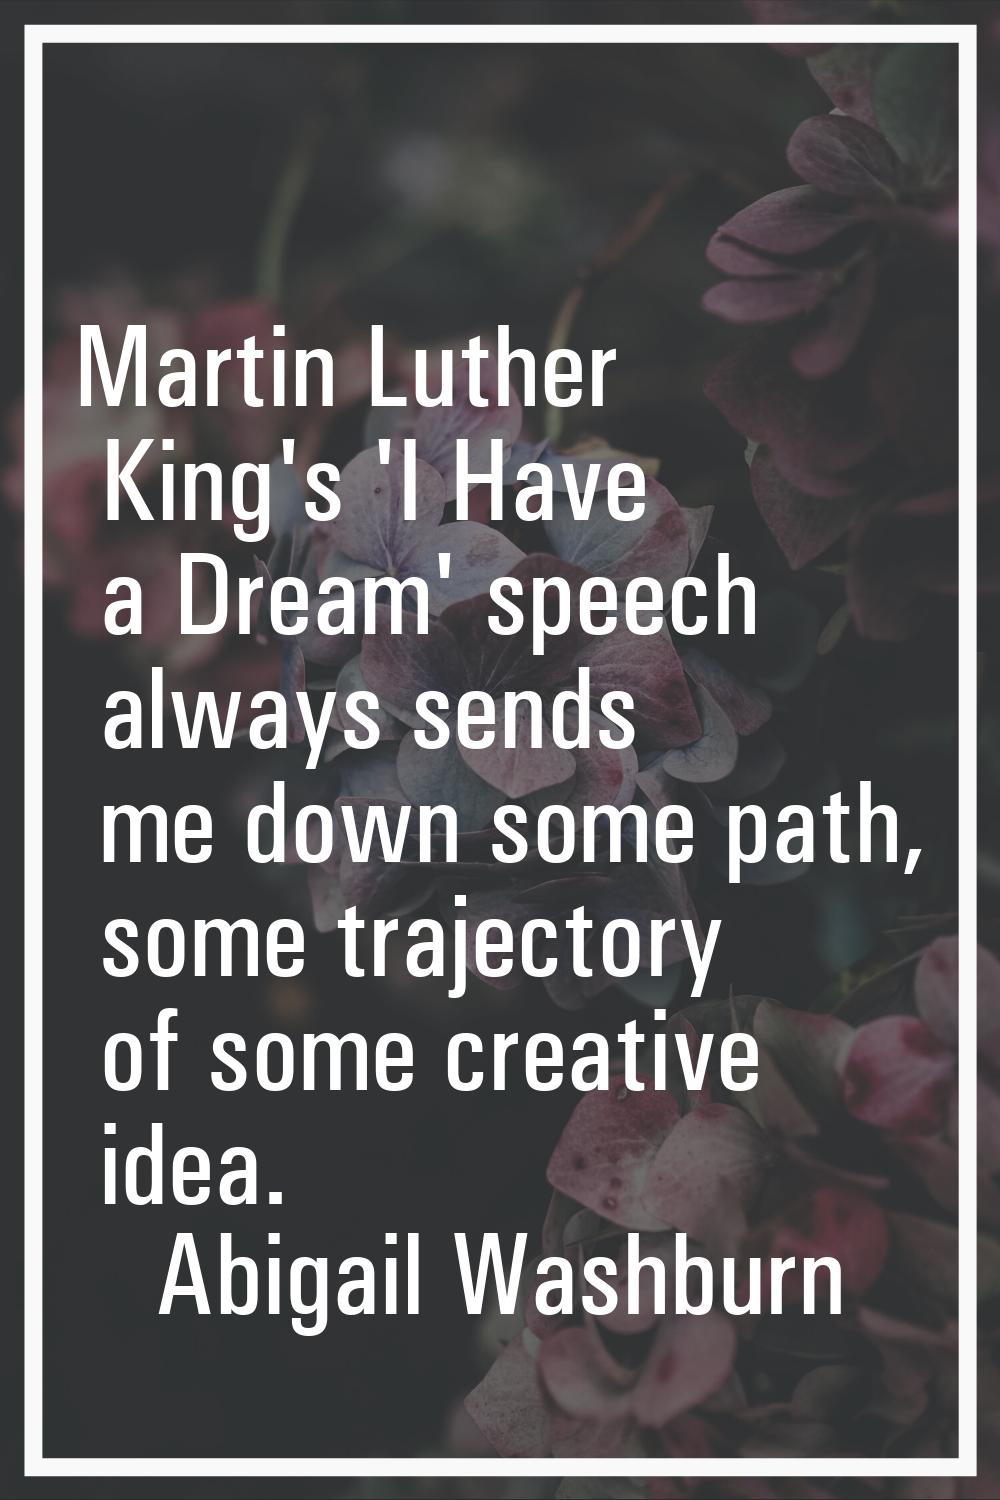 Martin Luther King's 'I Have a Dream' speech always sends me down some path, some trajectory of som